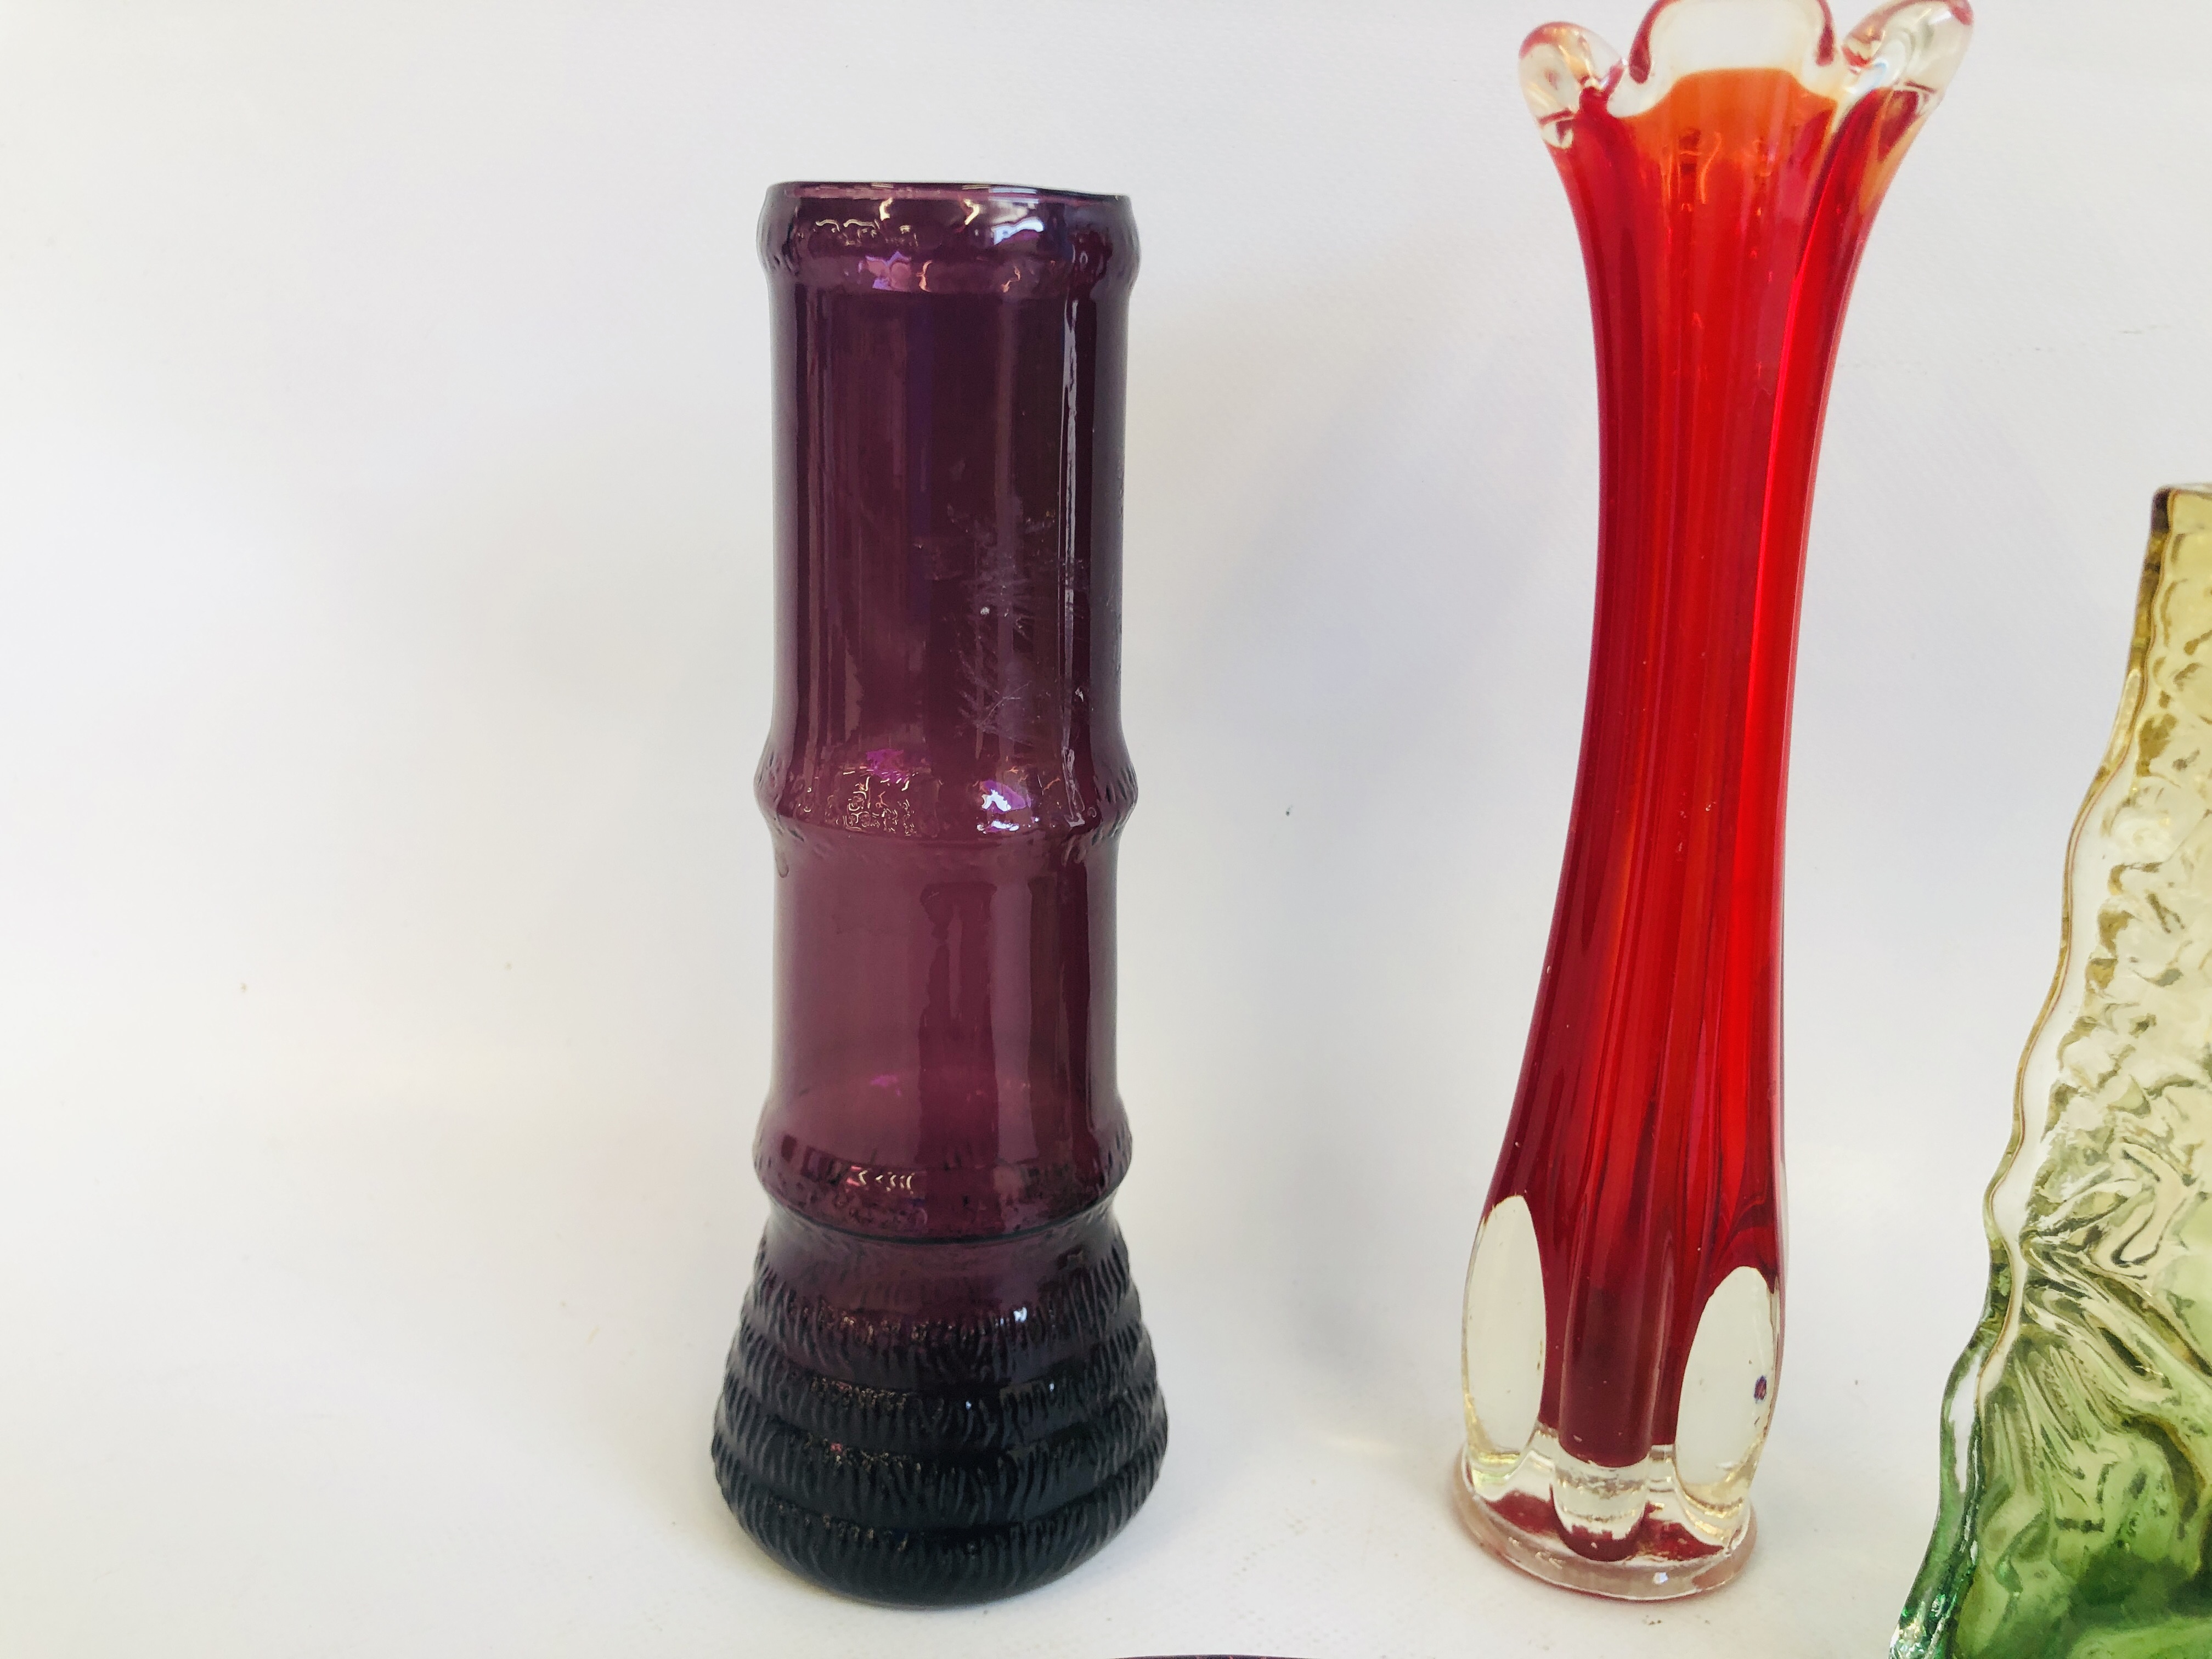 COLLECTION OF ART GLASS TO INCLUDE 3 TAGIMA STYLE VASES - Image 4 of 7